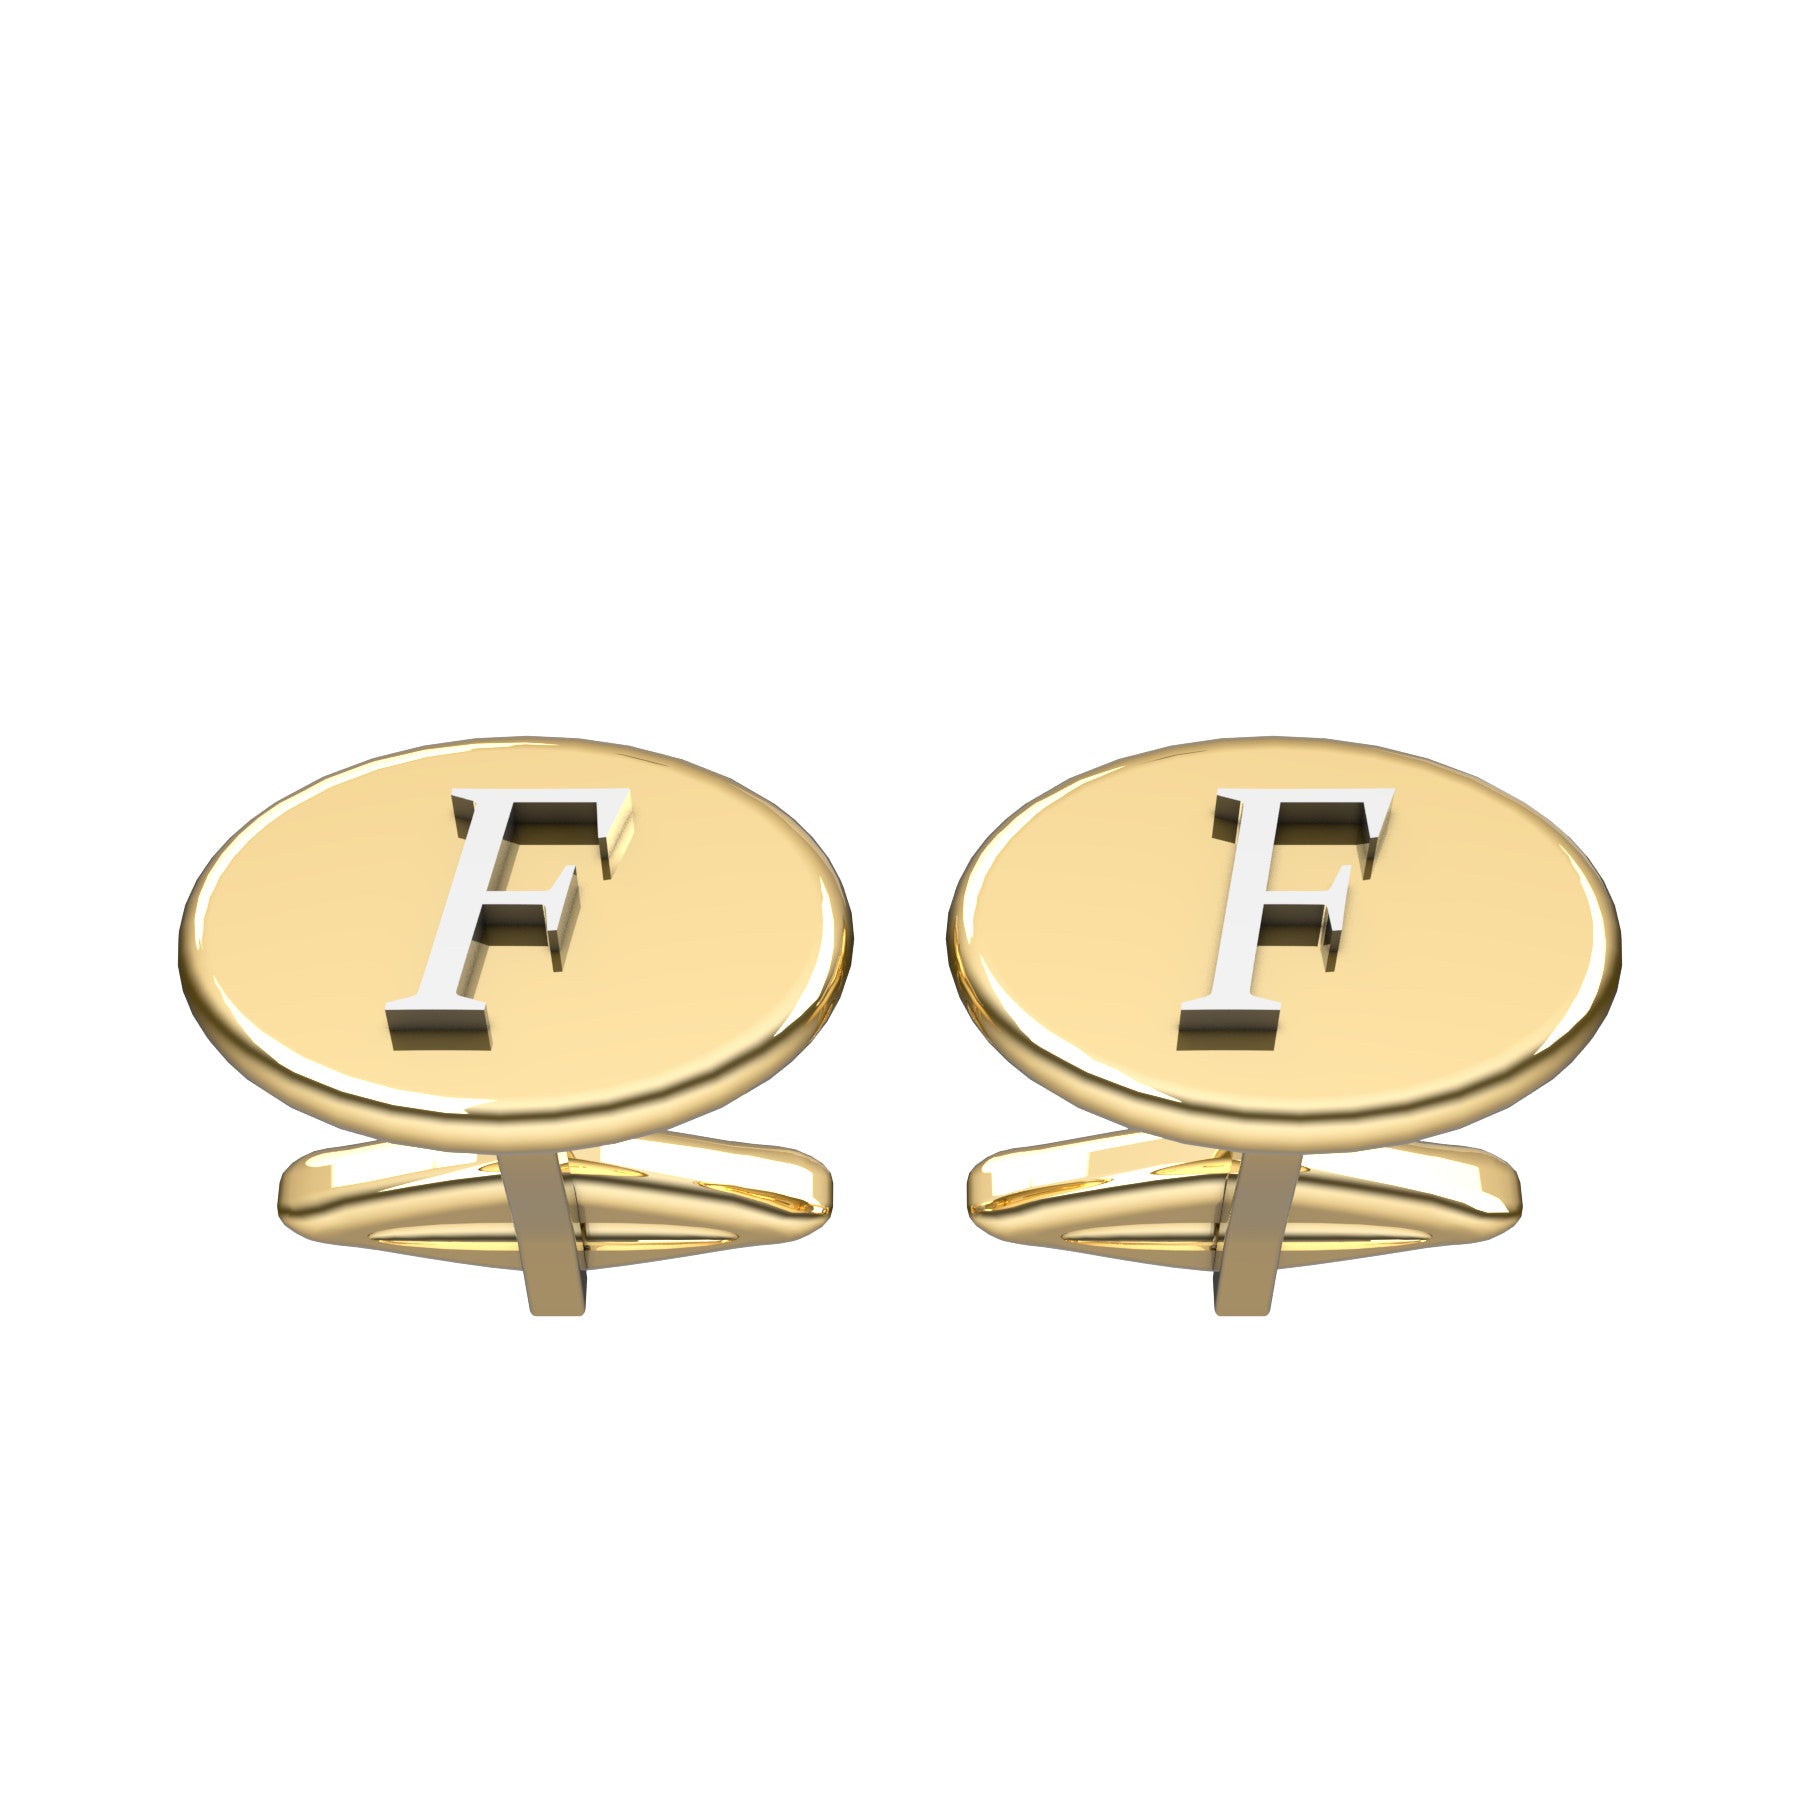 oval cufflinks, 18 K yellow gold, weight about 13,2 g (0.47 oz) size 13x18x3 mm 